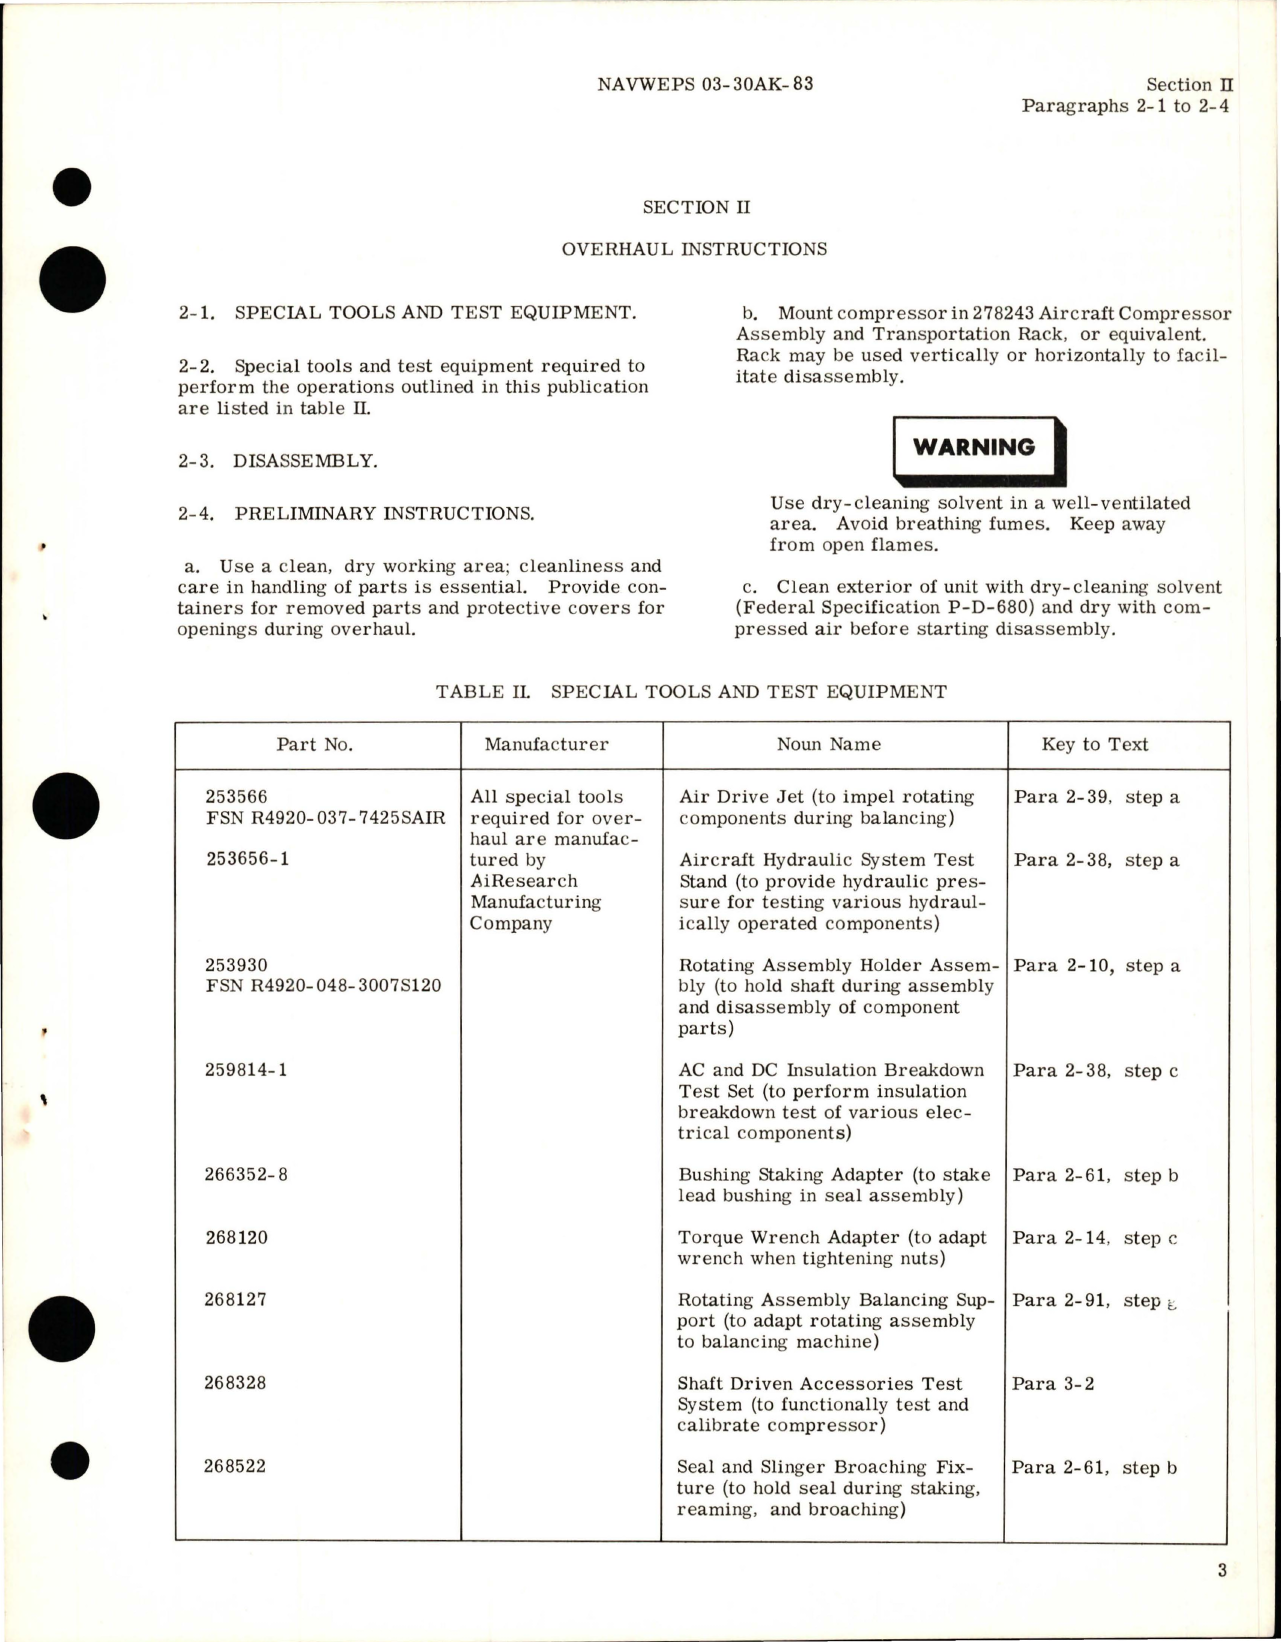 Sample page 7 from AirCorps Library document: Overhaul Instructions for Centrifugal Air Compressor - Parts 206400-1, 206400-1-6, 206400-1-7, and 206400-1-8